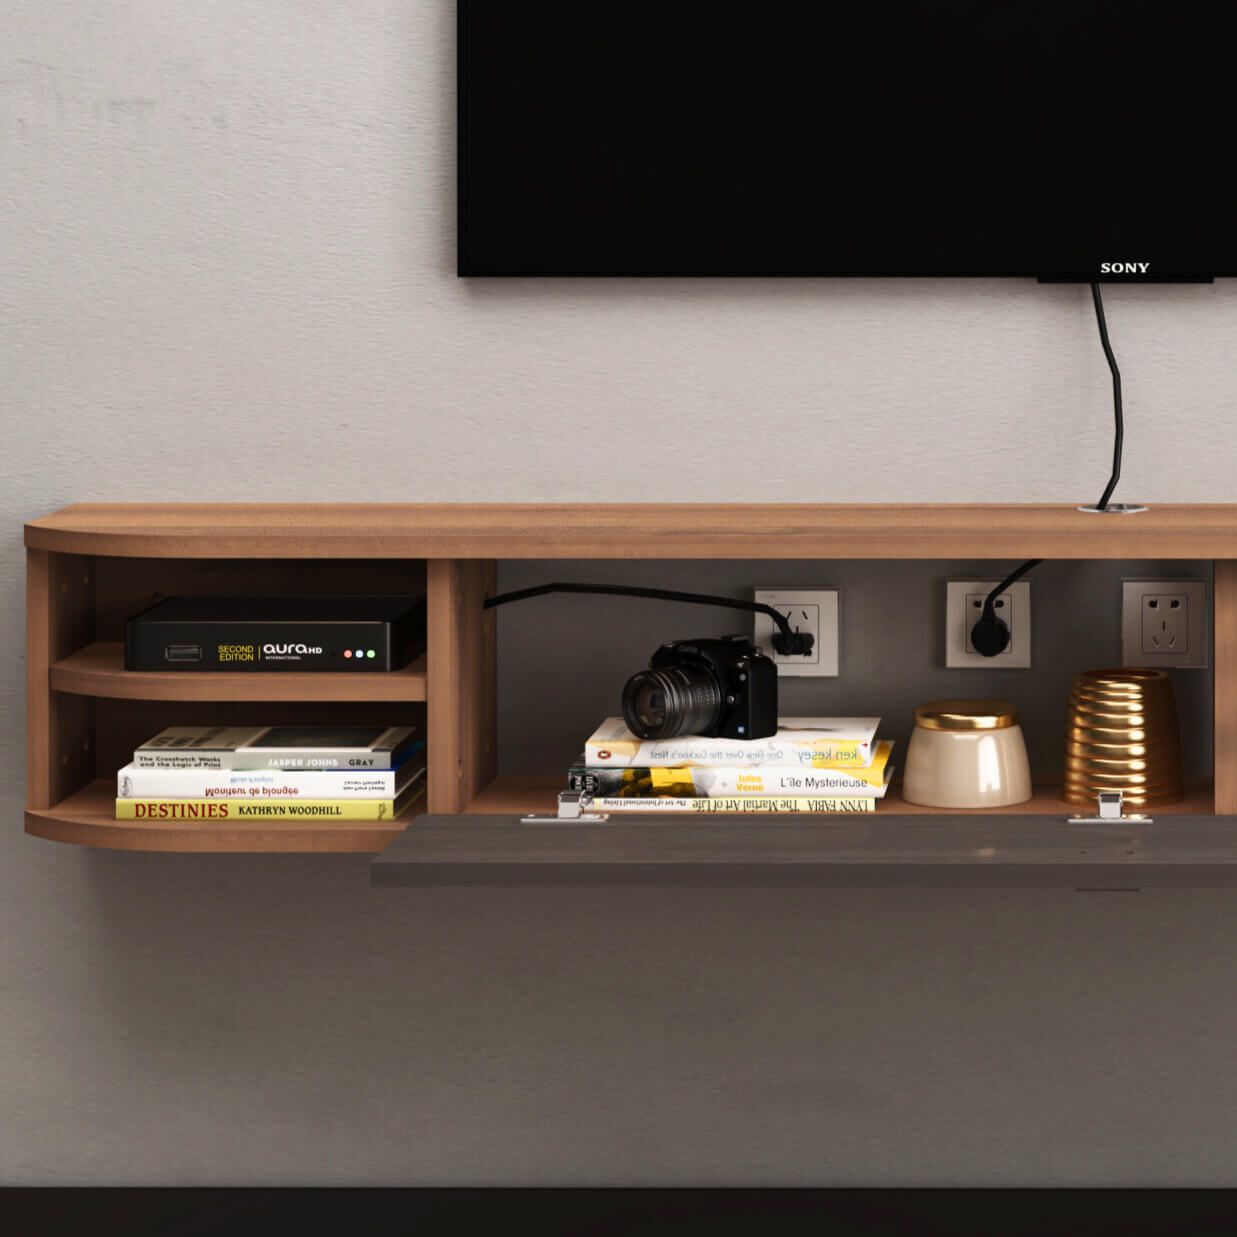 Plywood Floating TV Stand Shelf with Storage Cubbies for 50 inch TV, Walnut